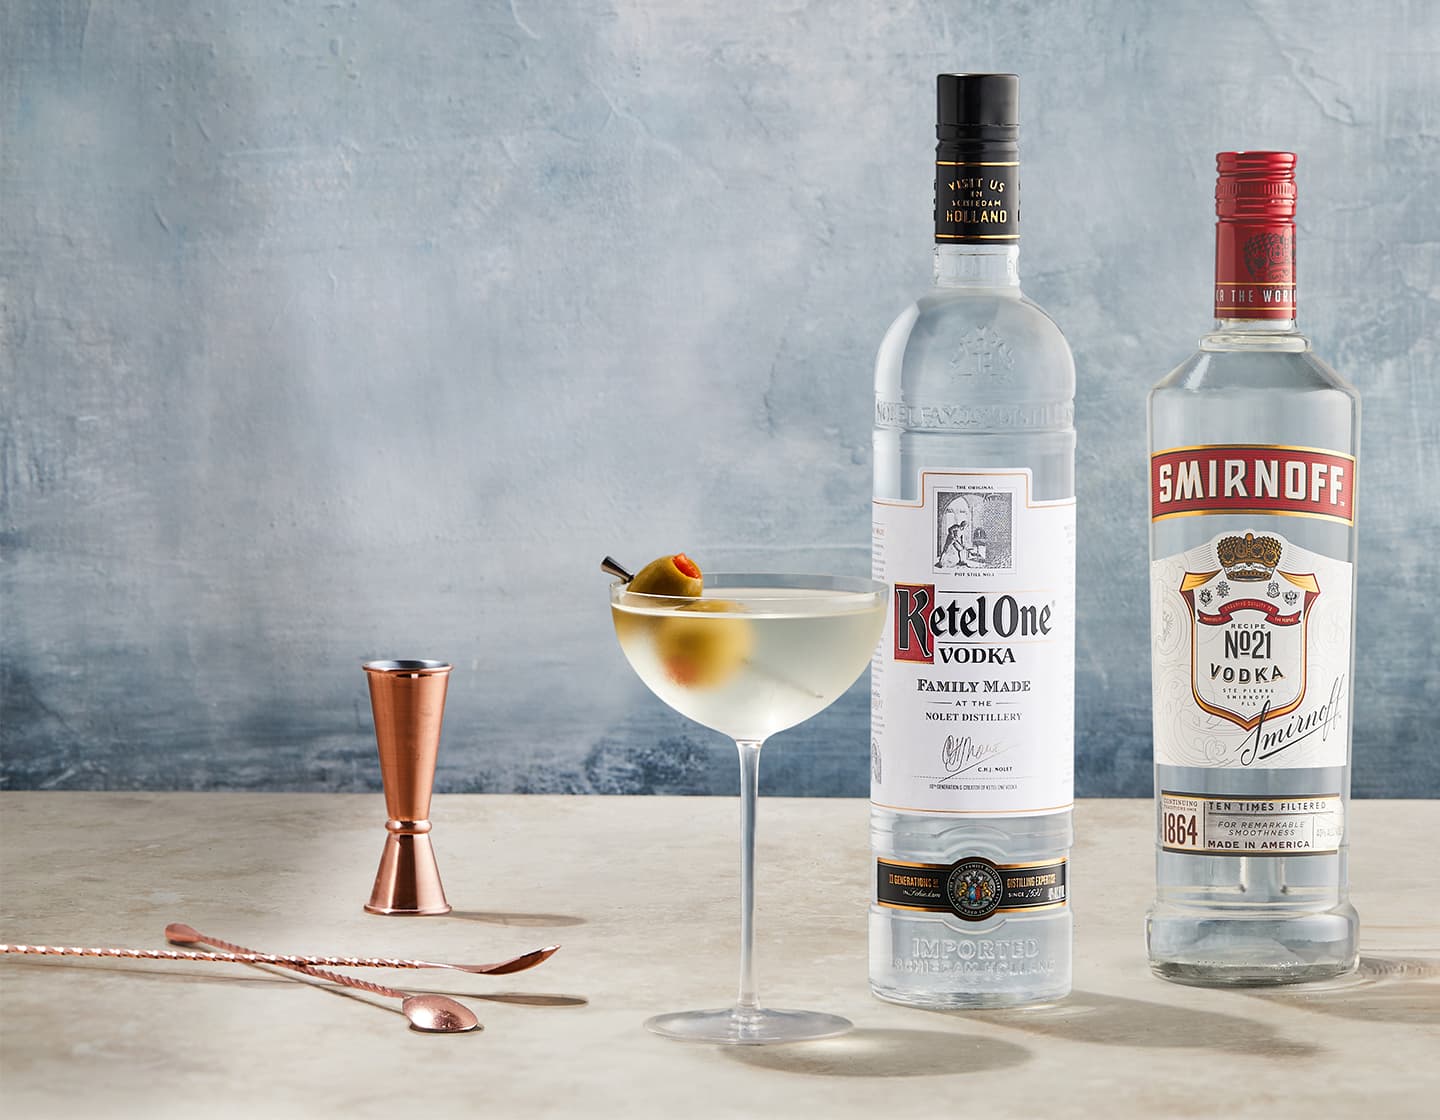 A bottle of Ketel One vodka and Smirnoff vodka on a table, next to a classic cocktail glass, containing a cold drink and a garnish of two olives. A rose gold jigger and stirrer are laying on the tabletop. 